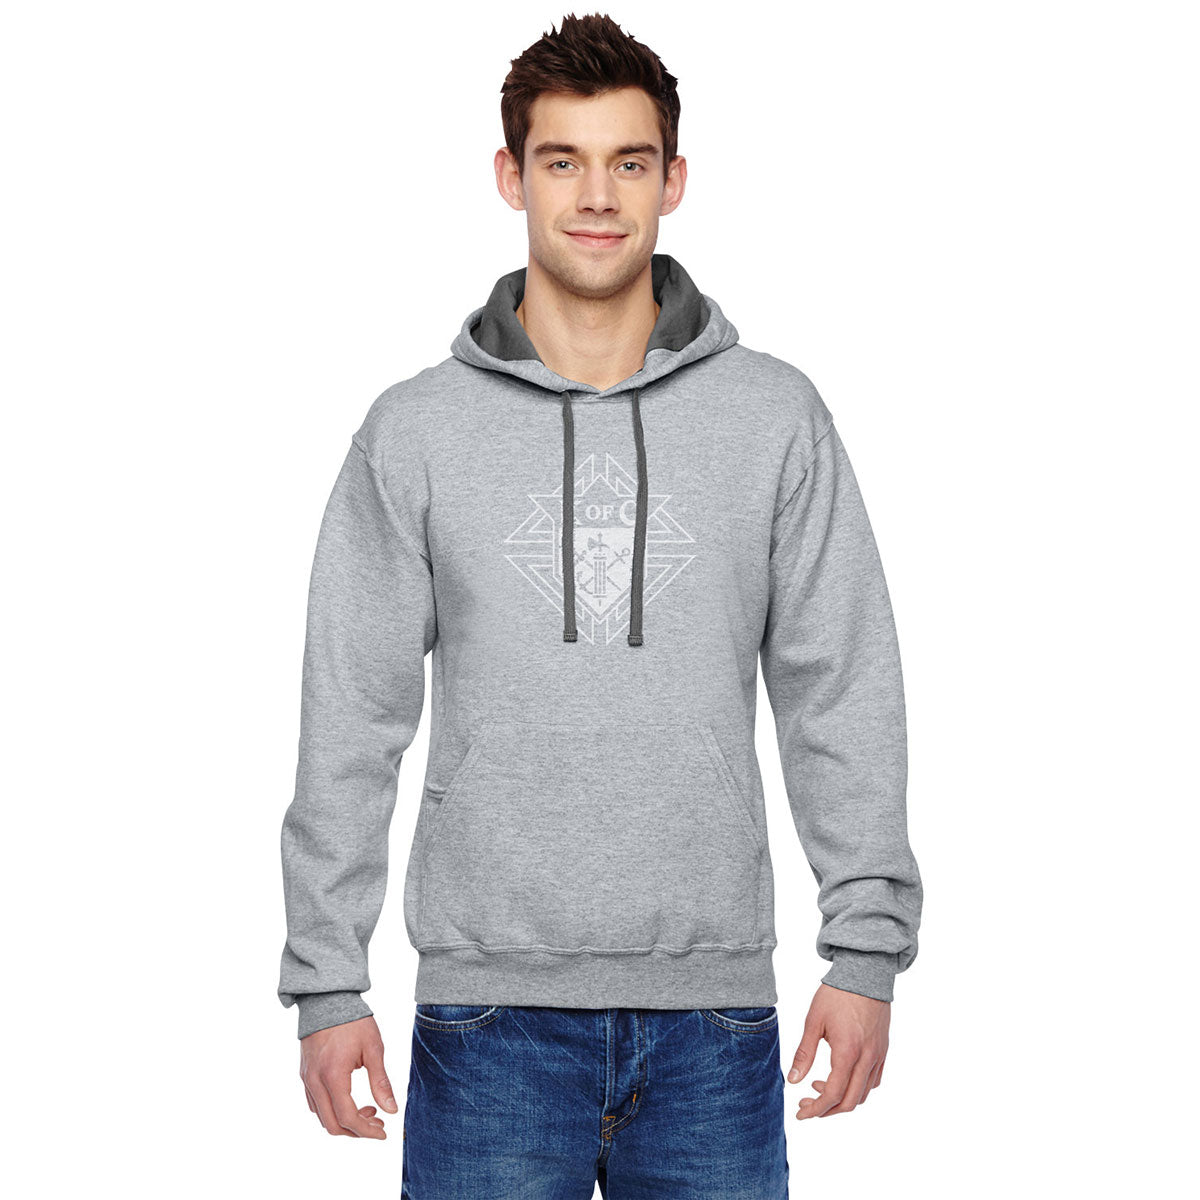 Knights of Columbus Hoodie - Knights Gear USA